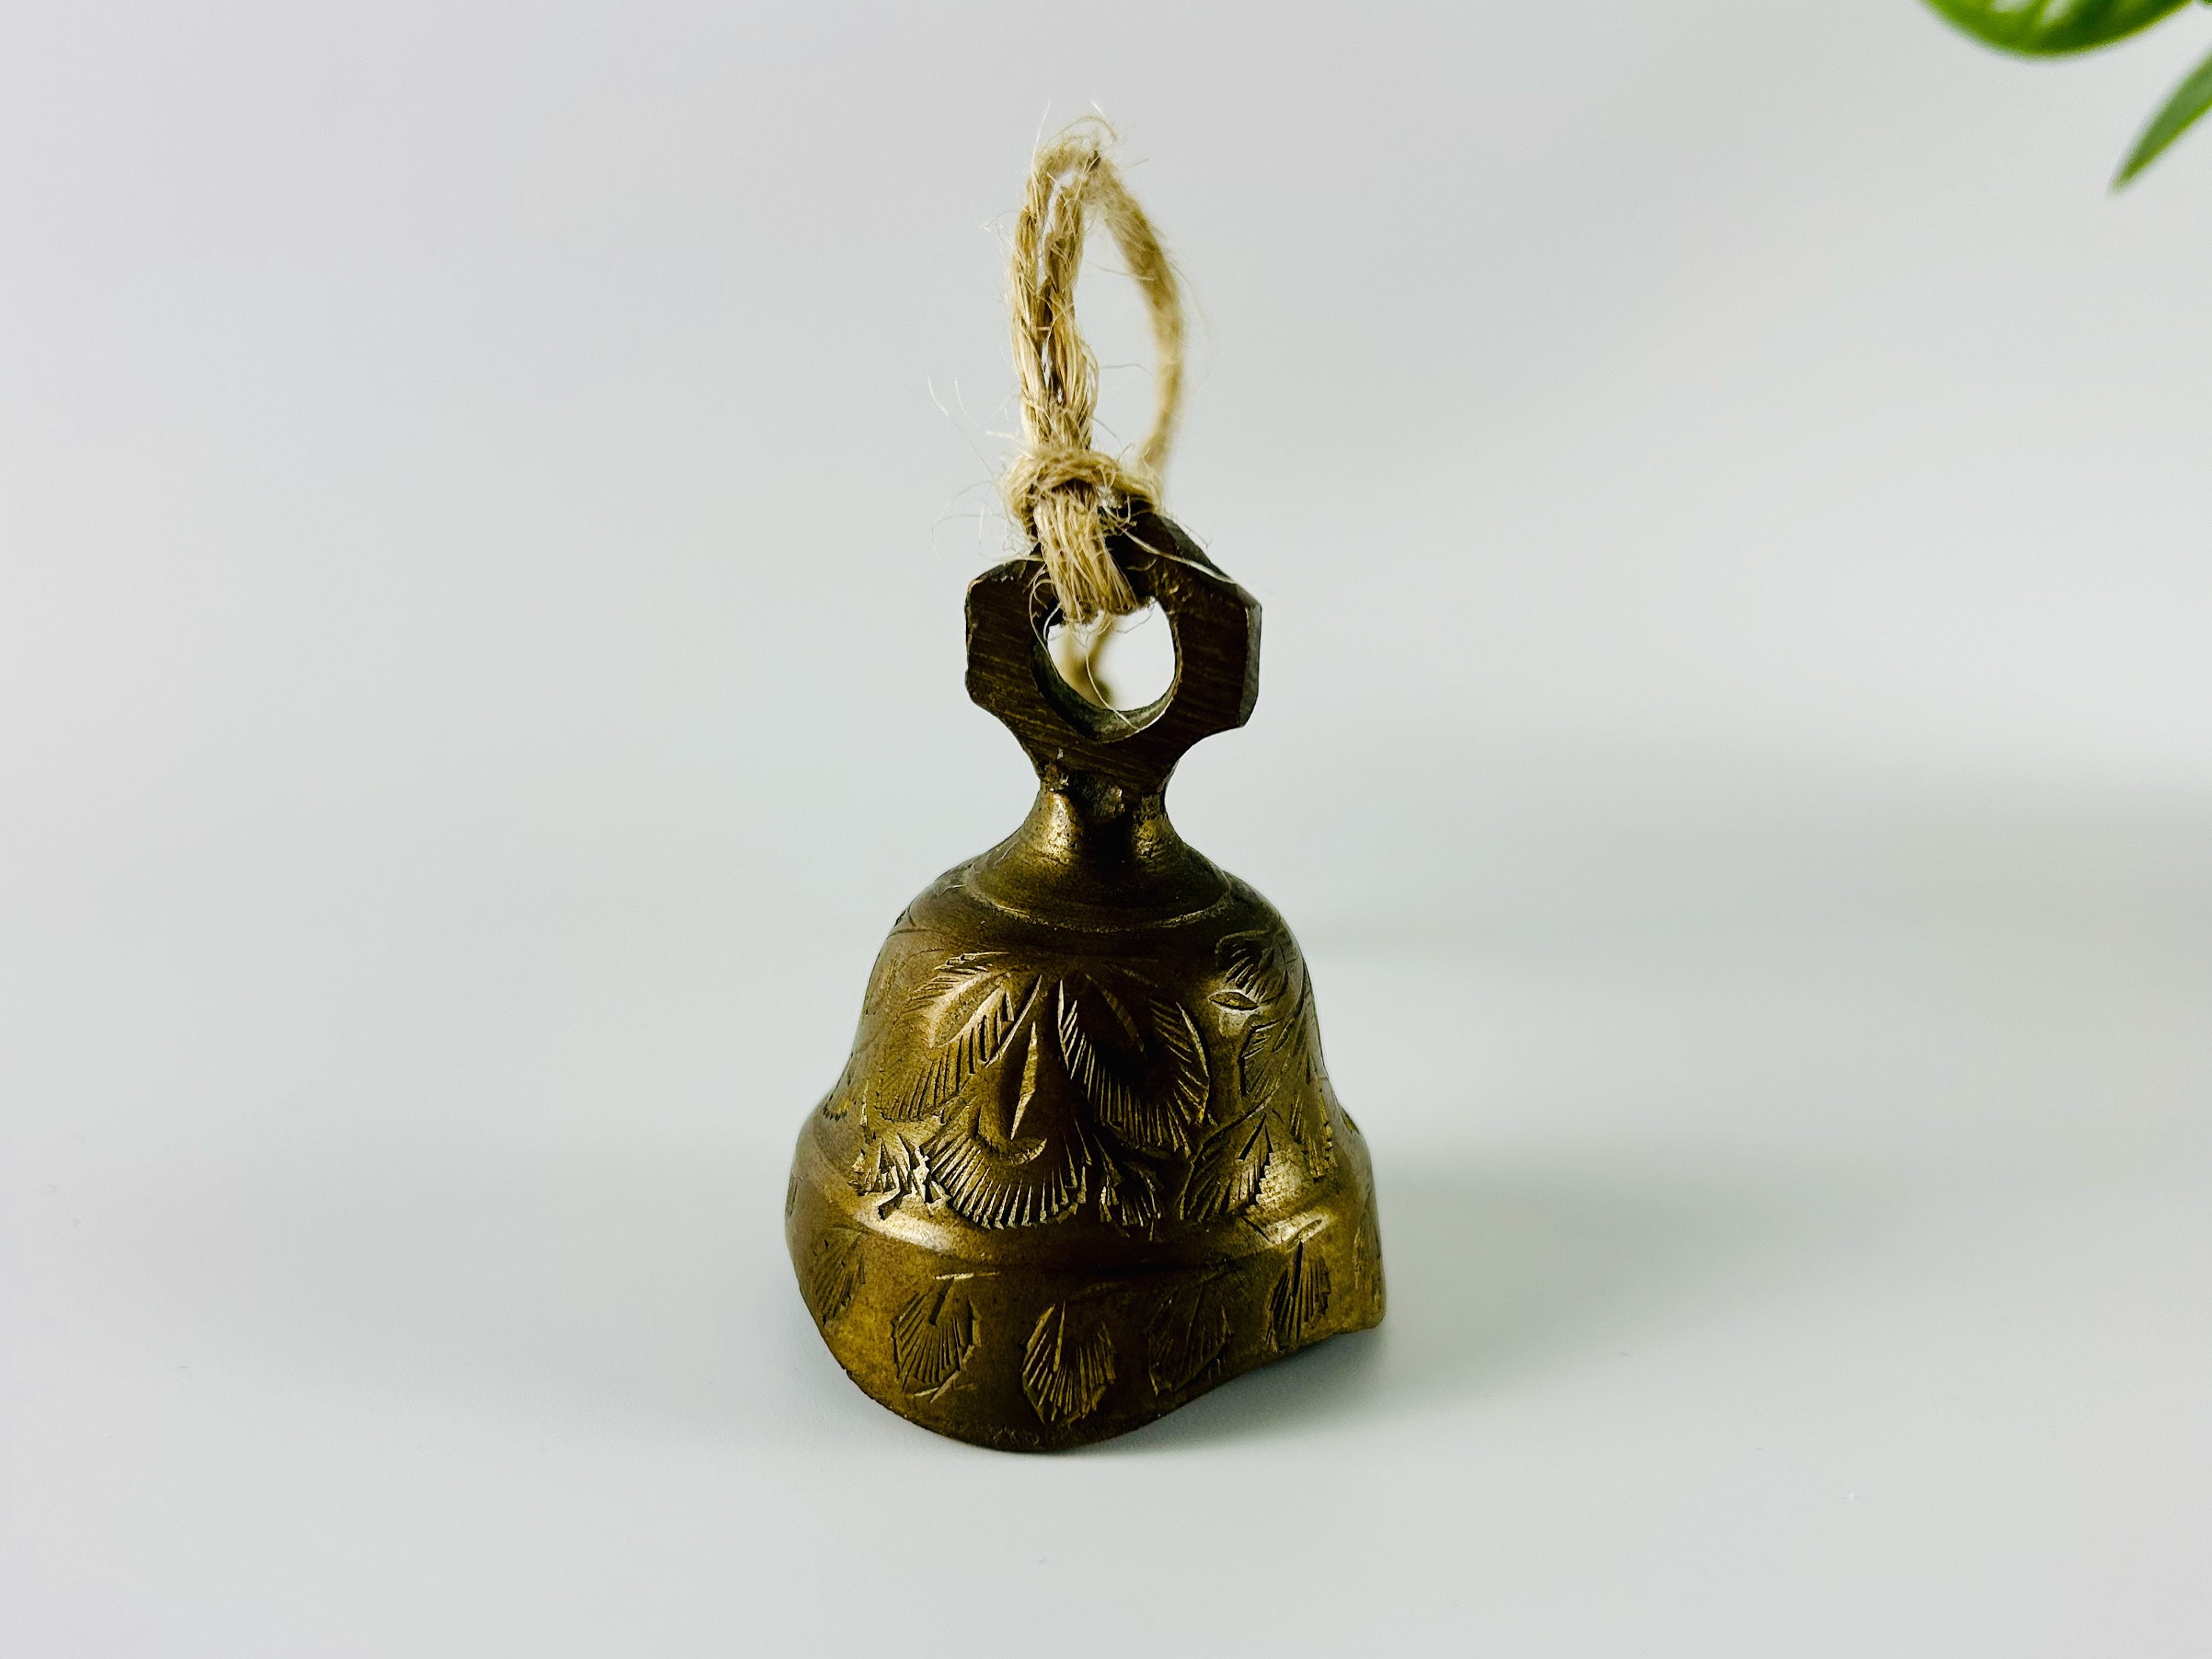 Brass Temple Hanging Bell, Brass Bells for Temple, Indian Home Decor,  Hanging Bell, Indian Homeware, Home Decor India 